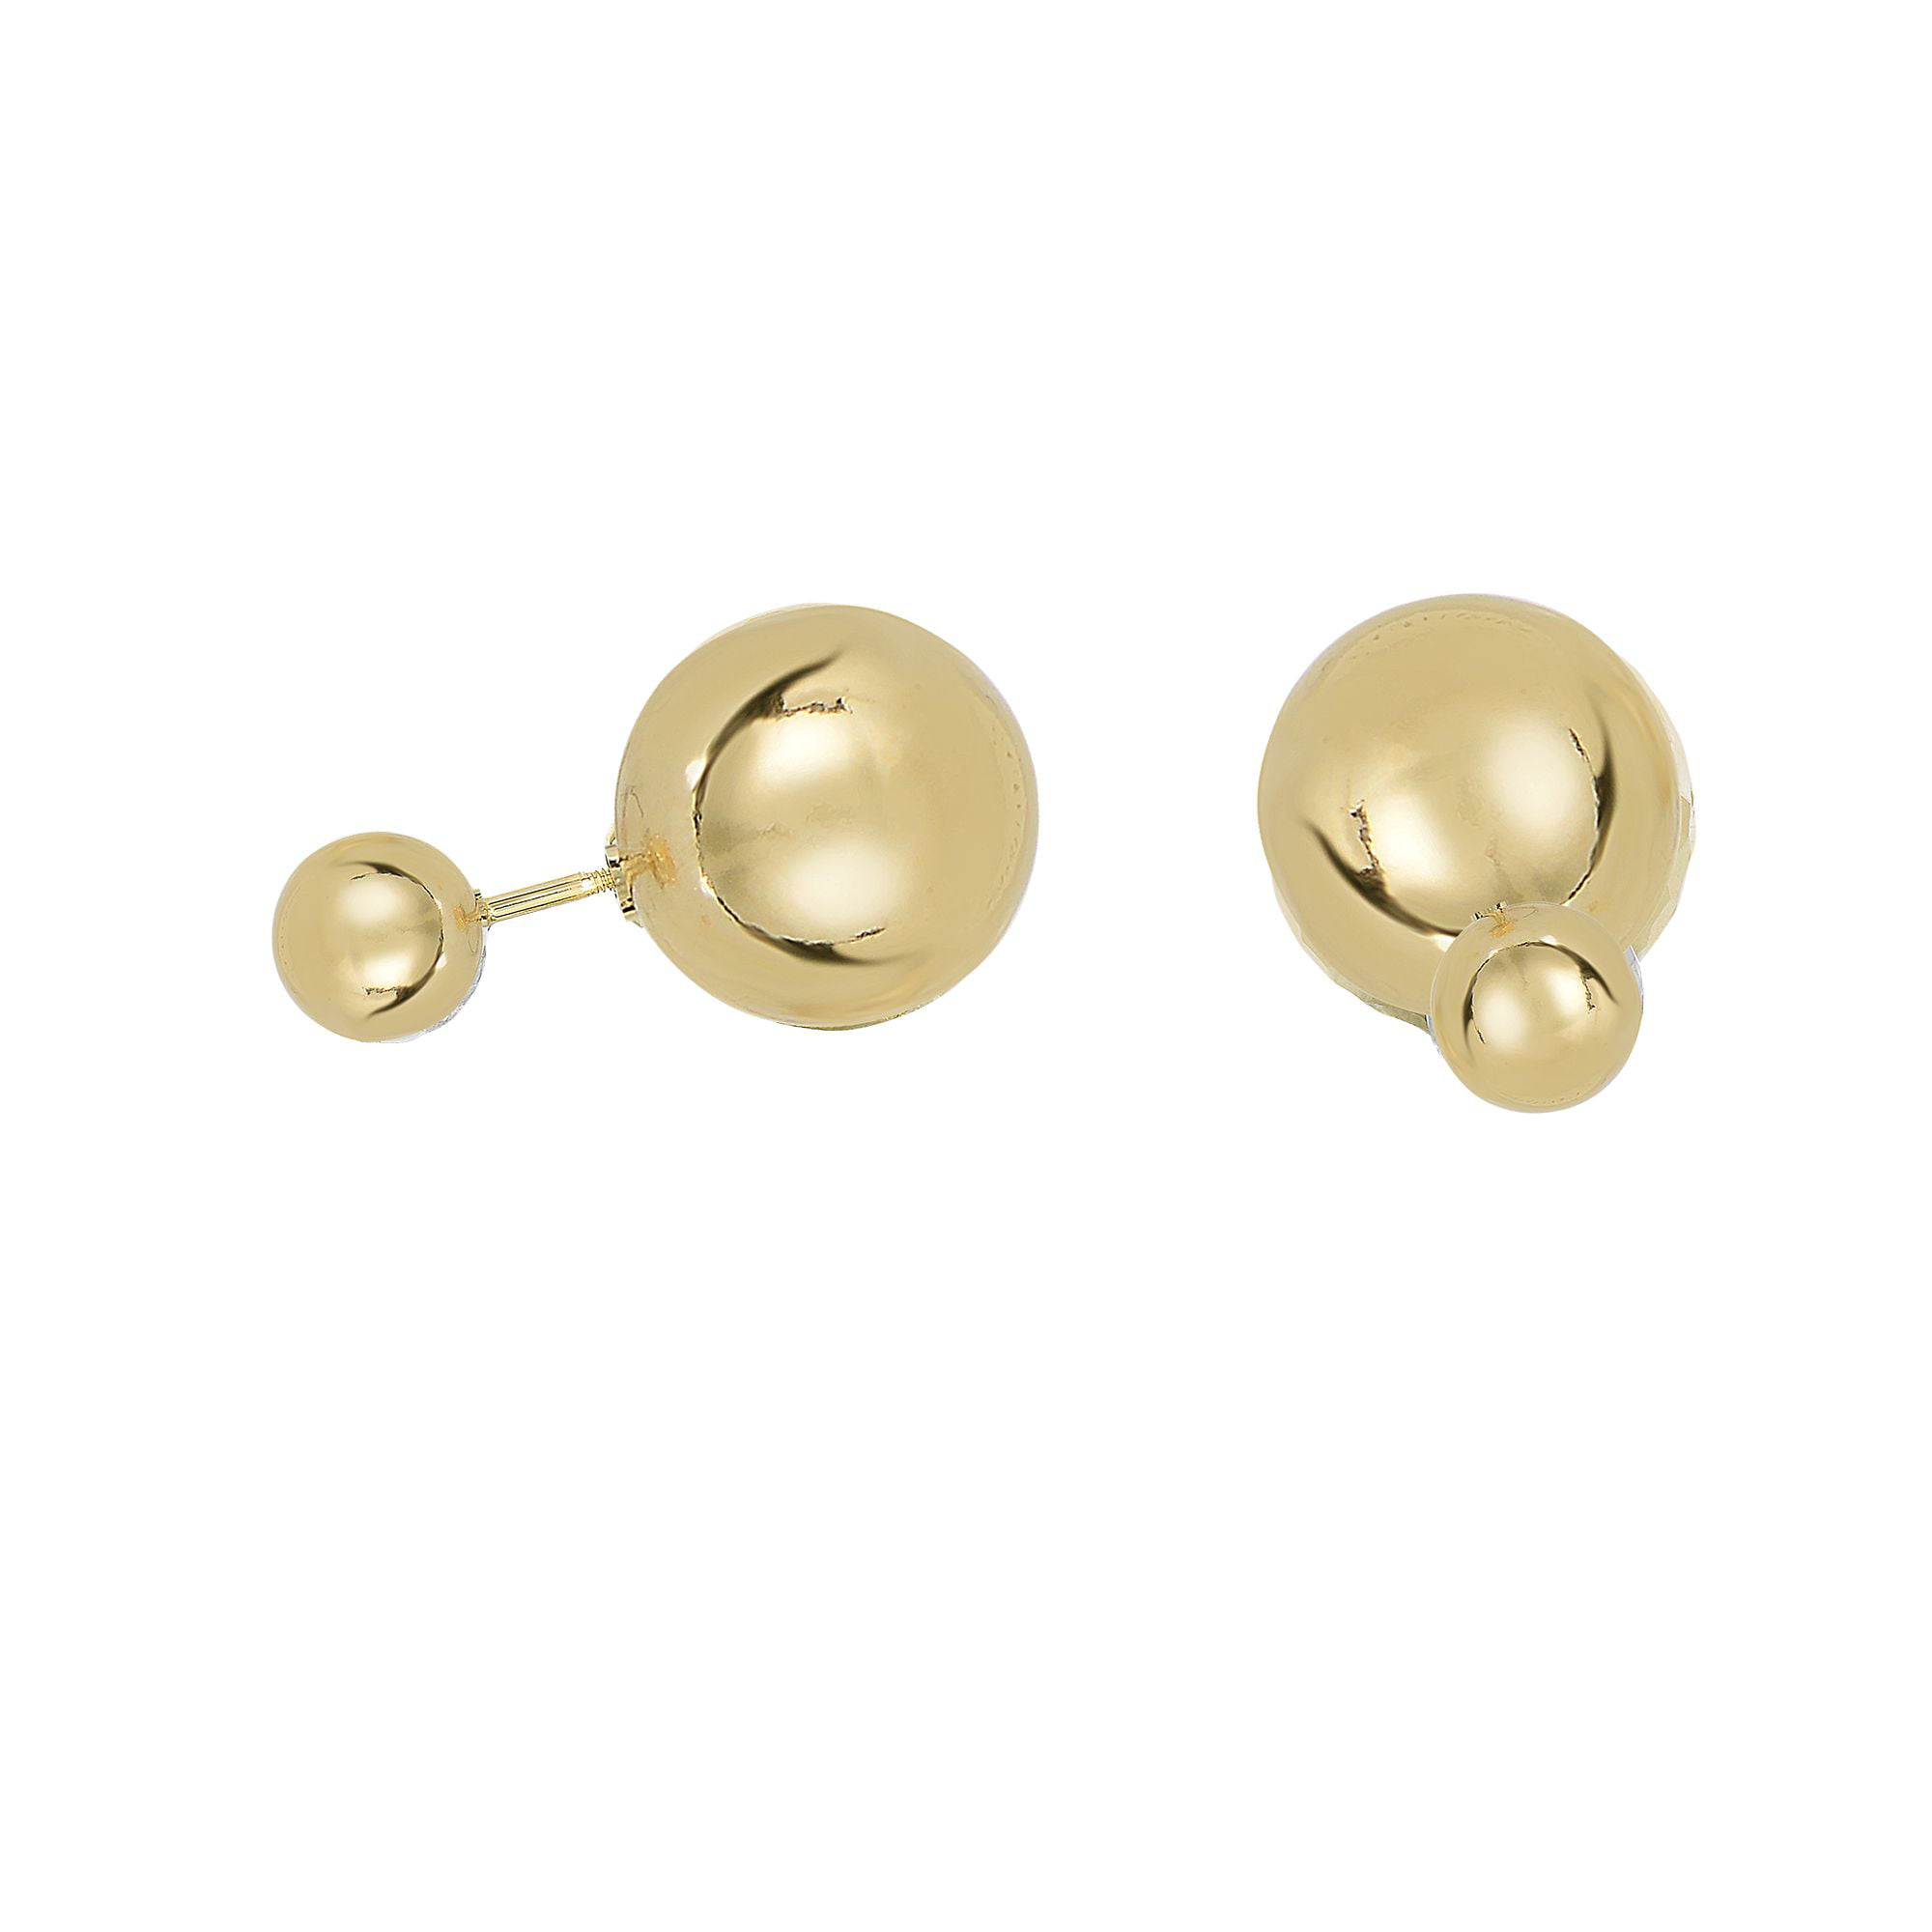 14K Yellow Gold 8mm Shiny Front Ball Stud Earrings with Yellow Gold 12mm Shiny Back Ball with Screw 16d2f6ba 48cc 40c0 9068 c2b2e07d1cc2 1.e16a5c1de21914815933336cf662bc66